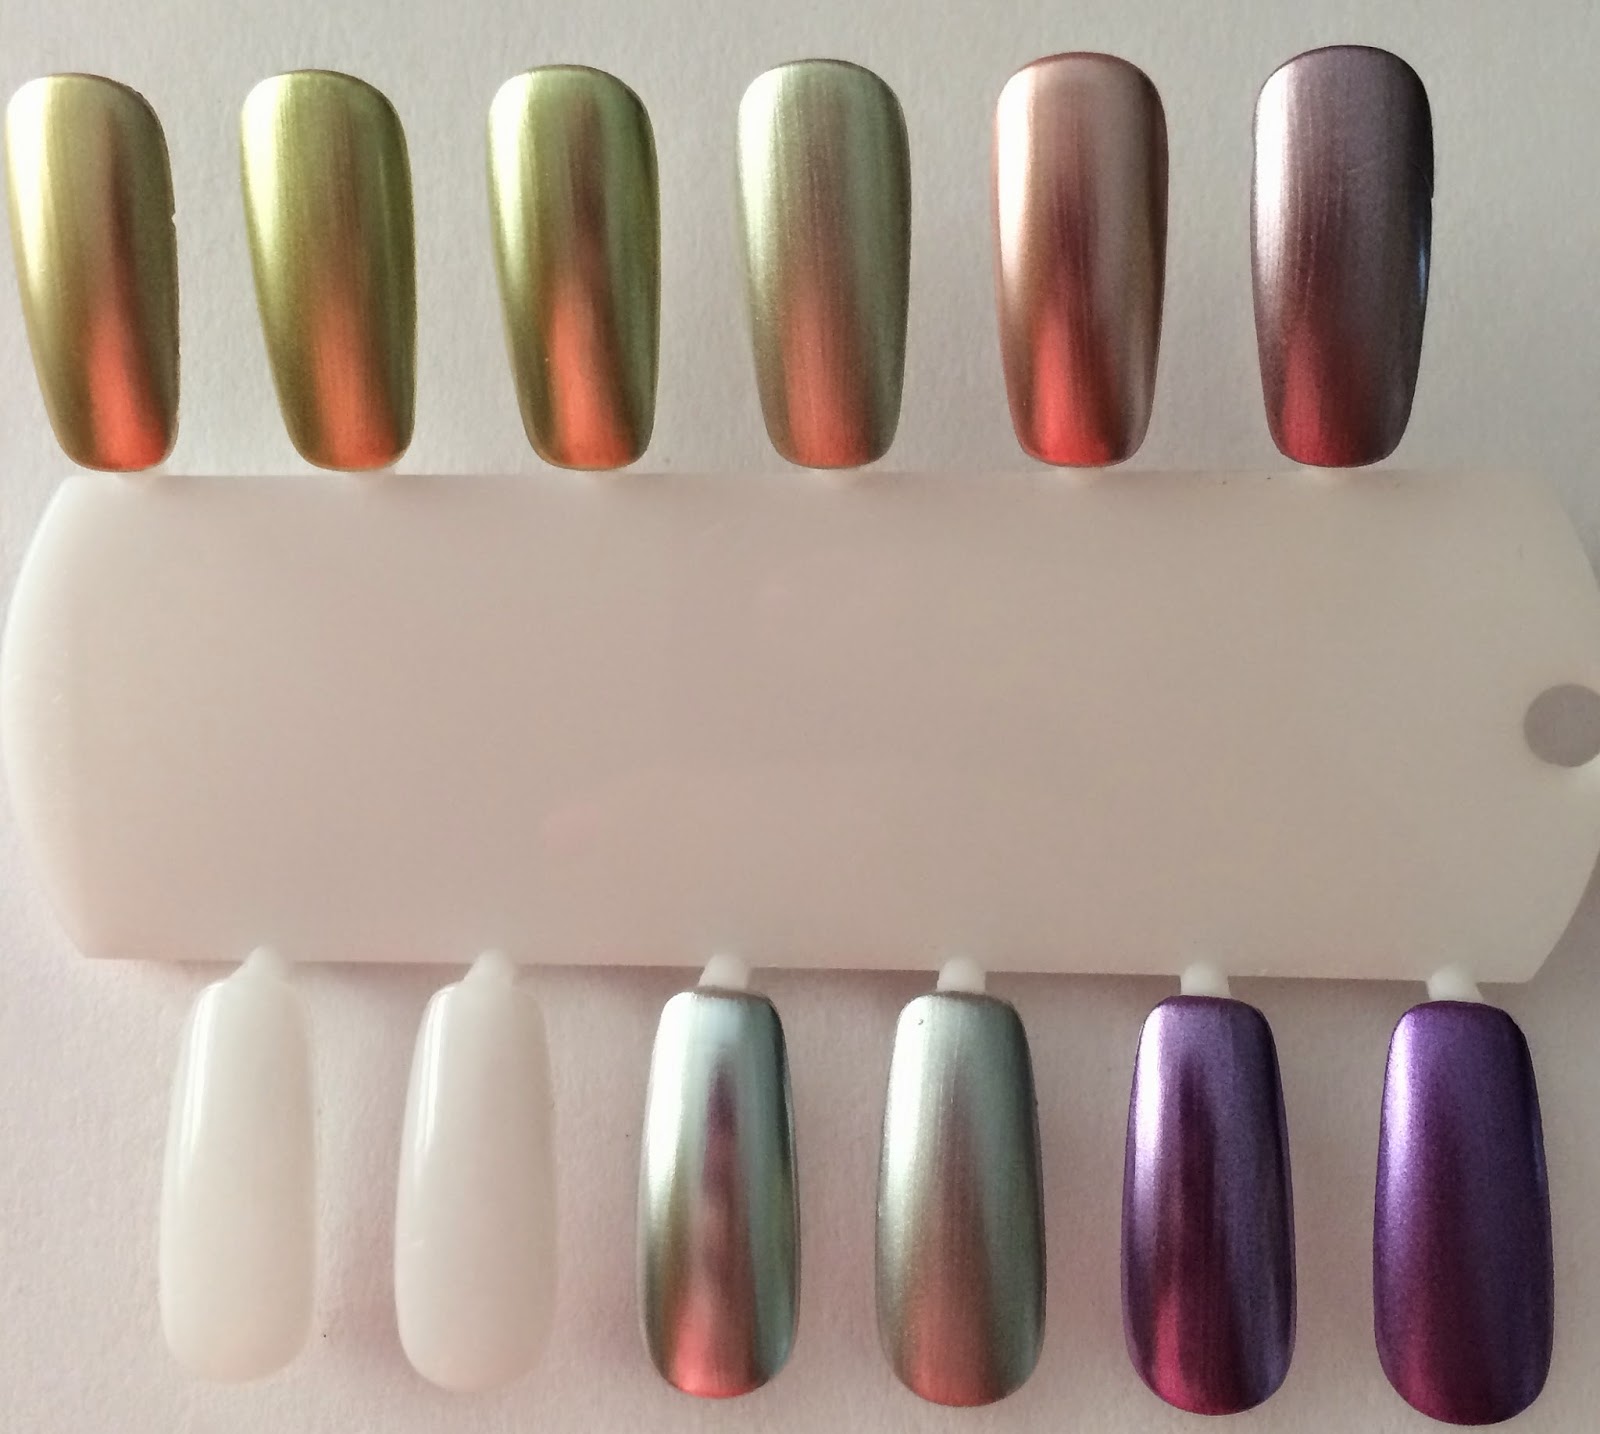 Confessions of a (Drugstore) Stalker: Swatches of Sally Hansen Color ...